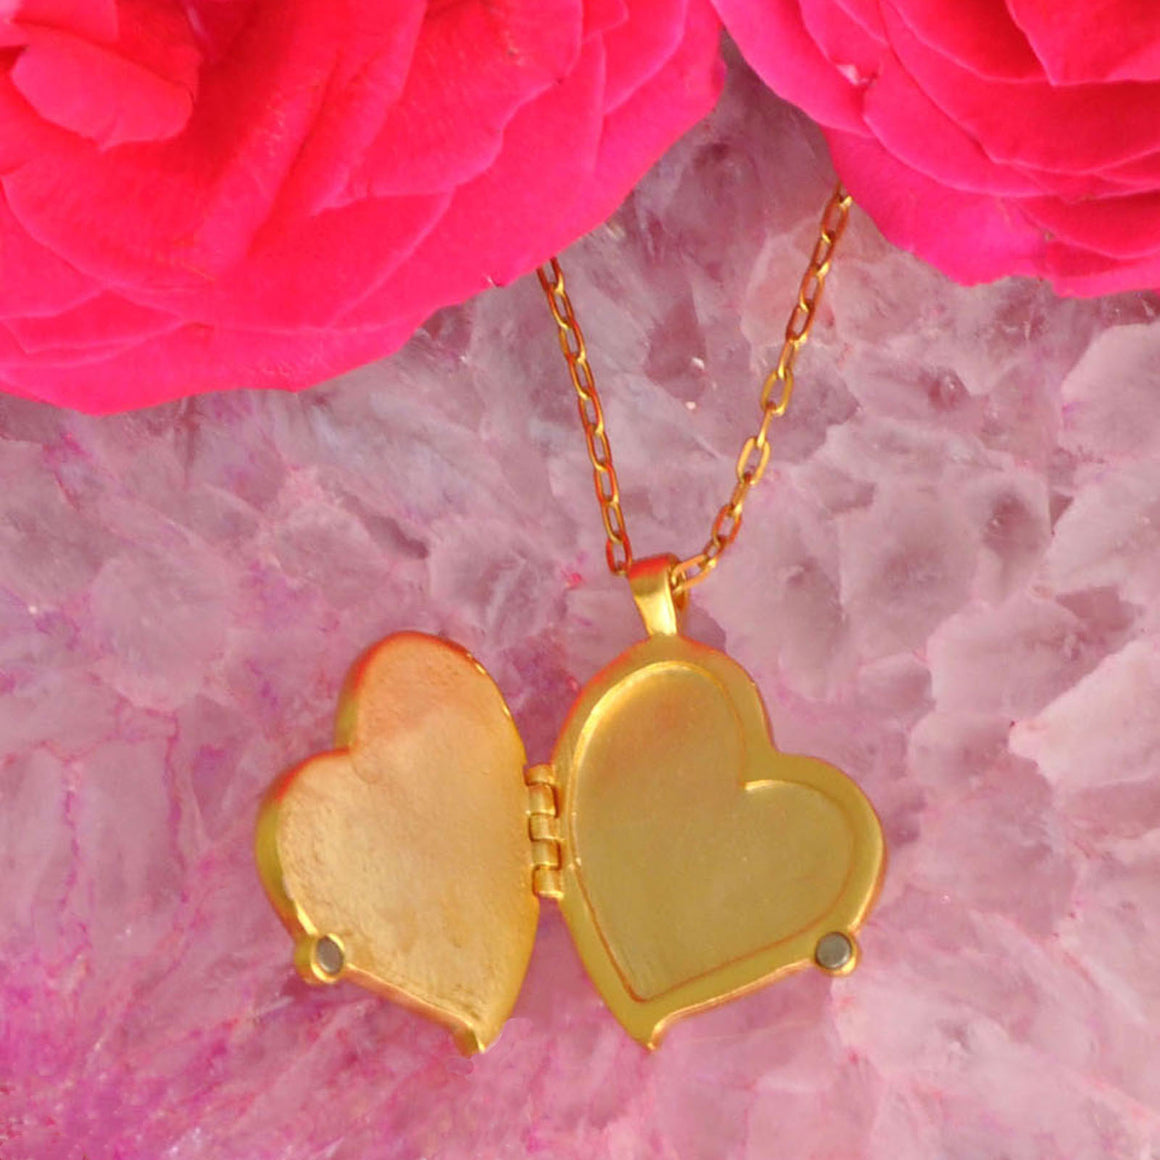 Tree of Life Heart Locket Necklace - 24K Gold Plated